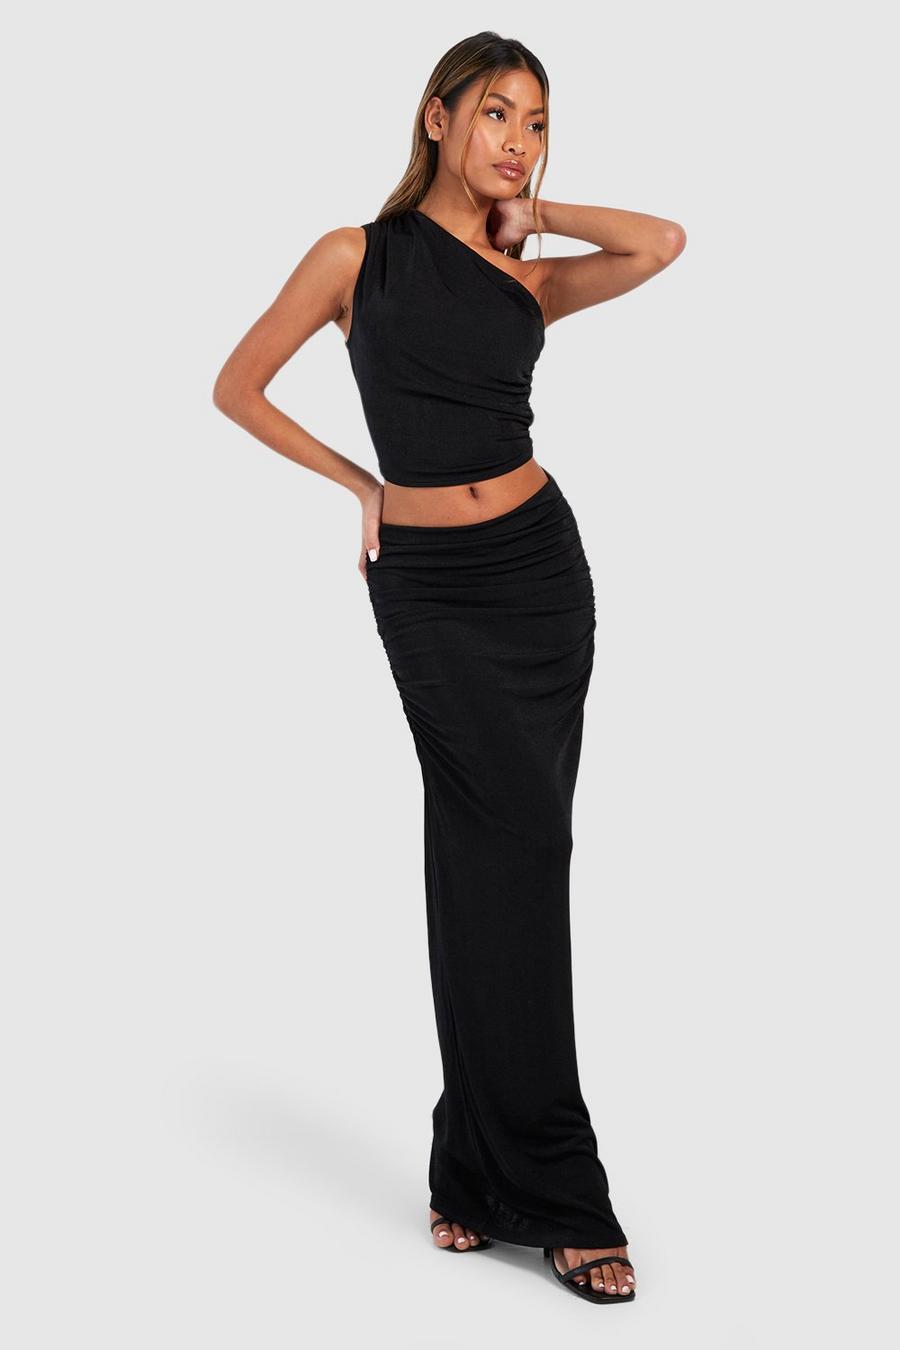 Black Acetate Slinky Asymmetric Ruched Top & Ruched Maxi Skirt image number 1